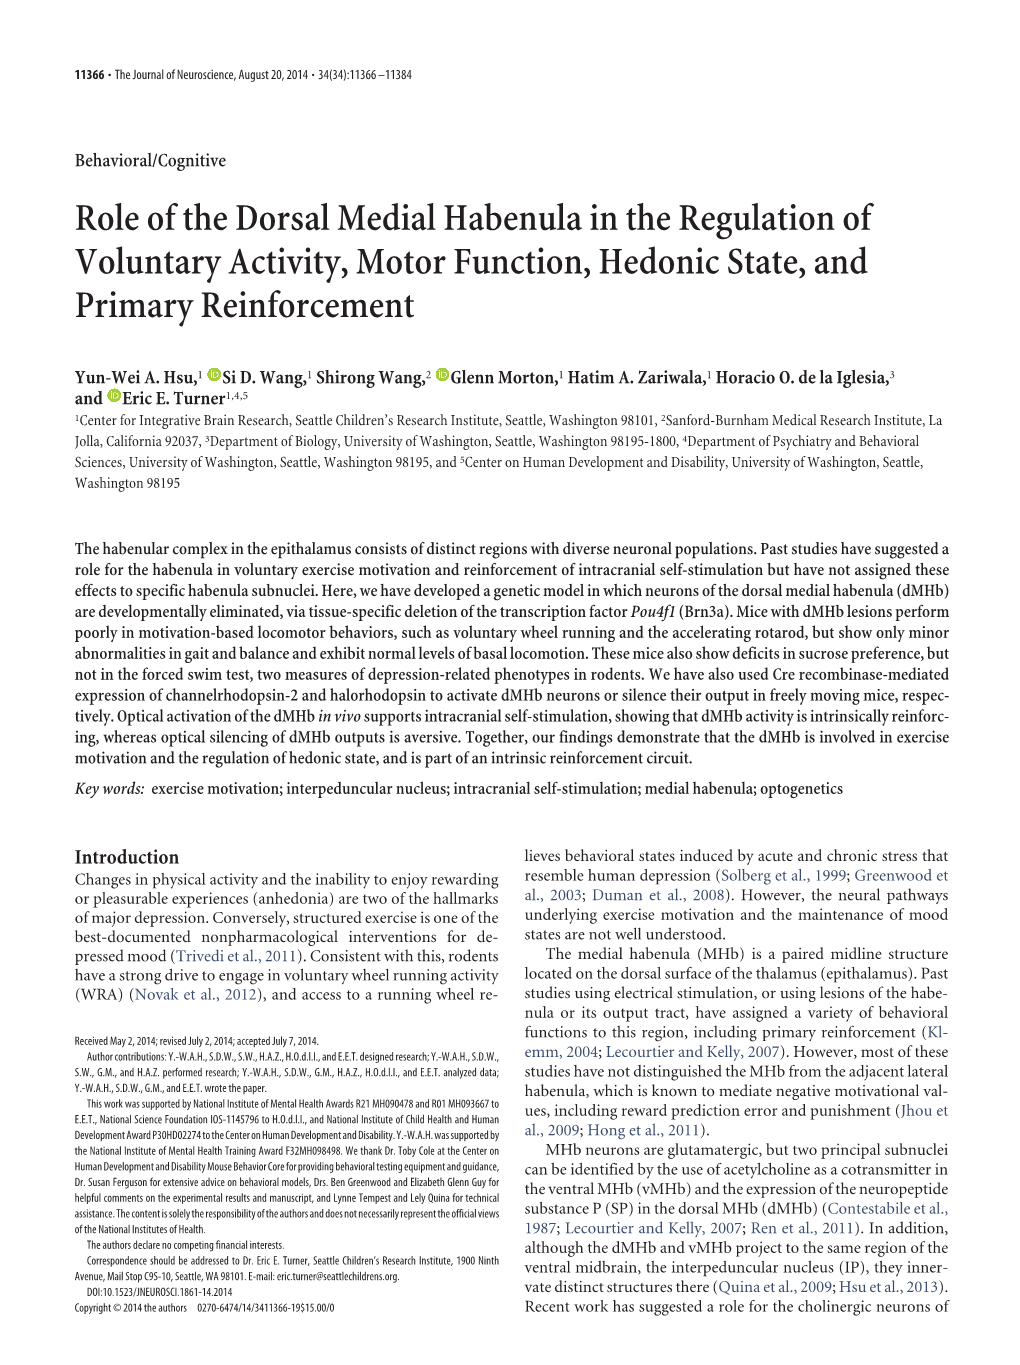 Role of the Dorsal Medial Habenula in the Regulation of Voluntary Activity, Motor Function, Hedonic State, and Primary Reinforcement